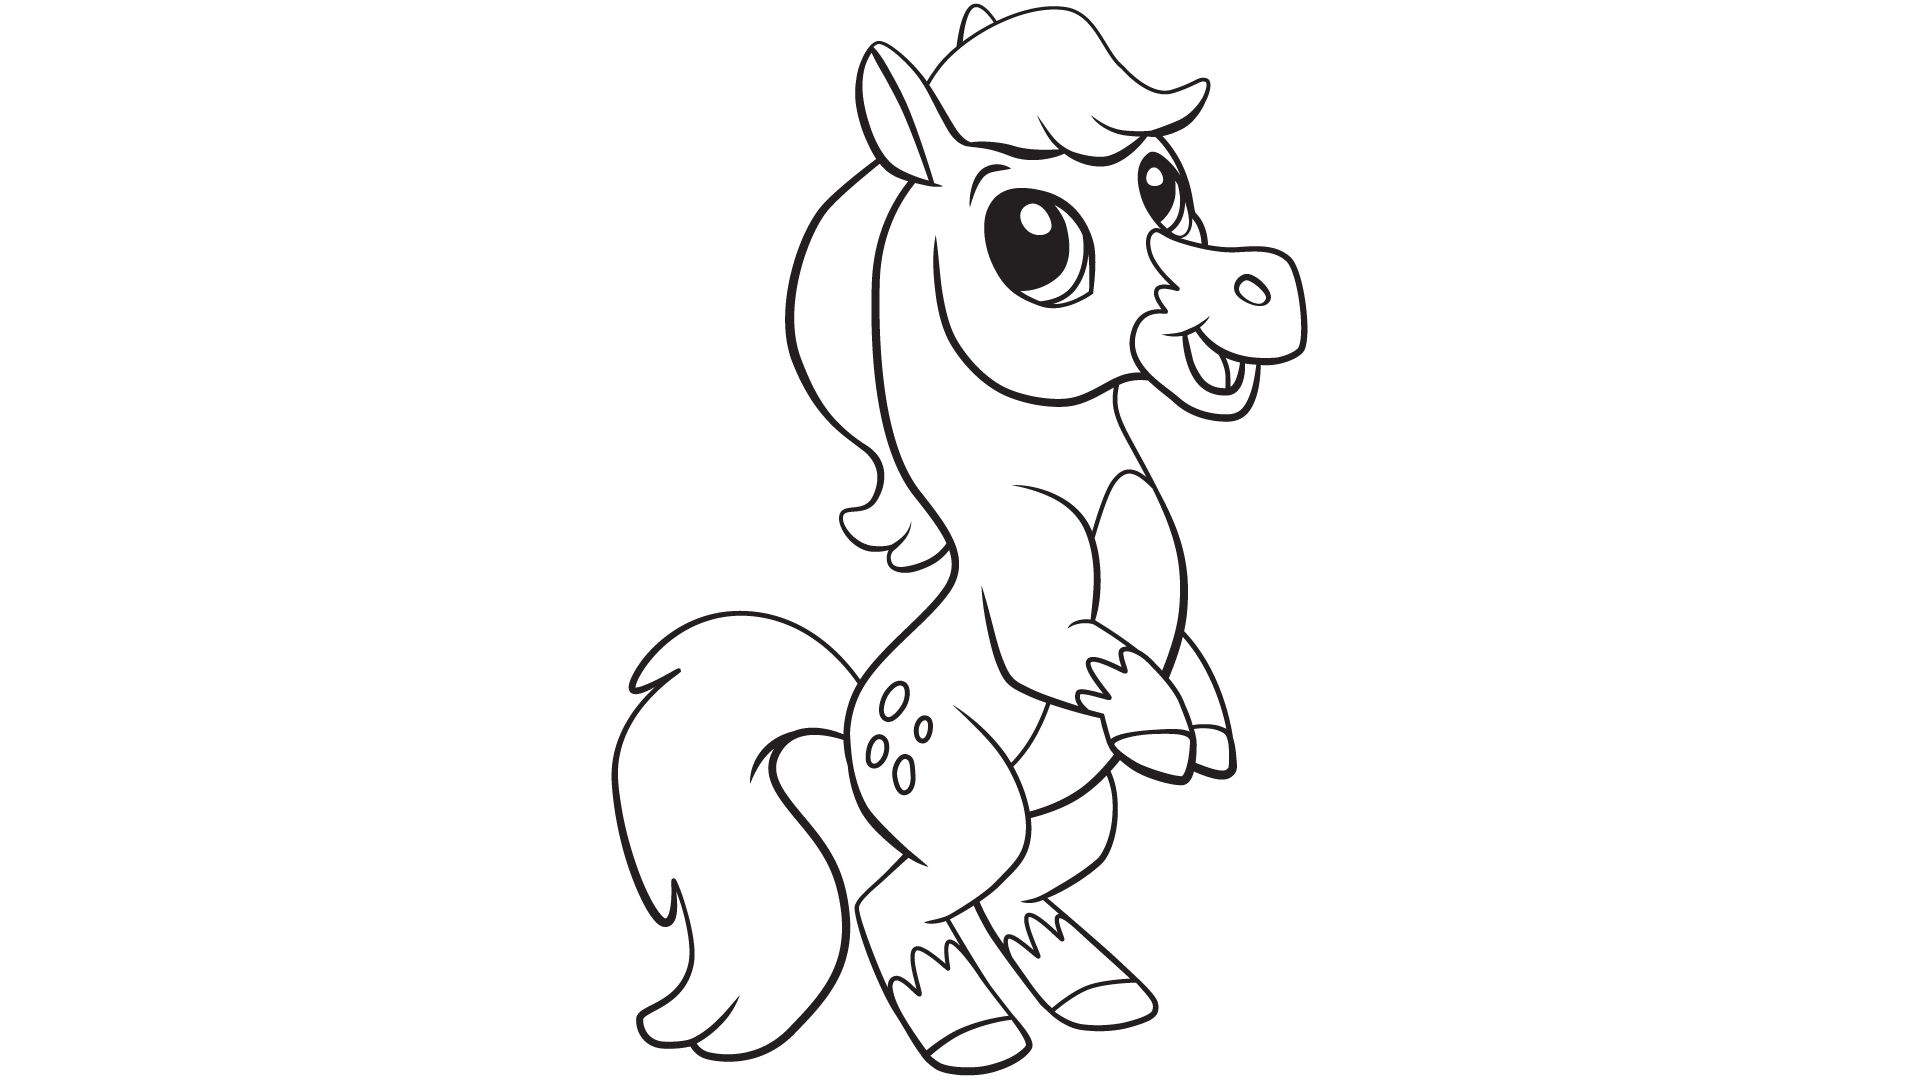 Horses Cartoon Coloring Page - Coloring Home